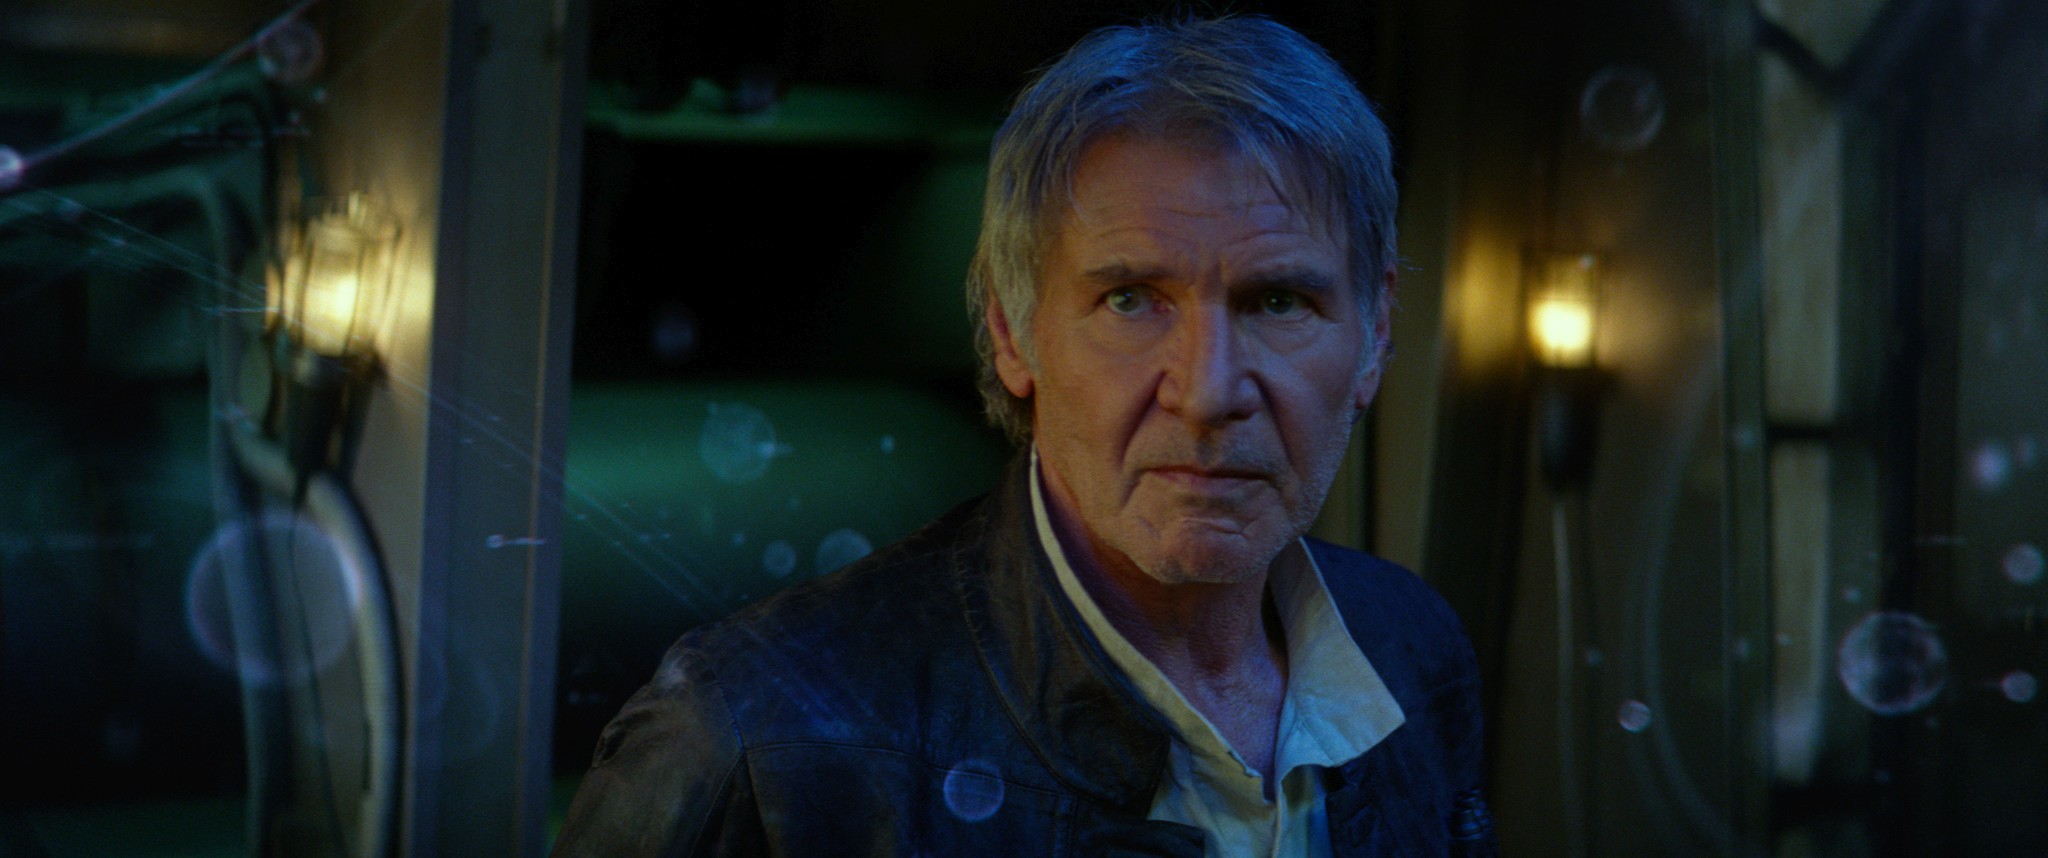 movie, star wars episode vii: the force awakens, han solo, harrison ford, star wars